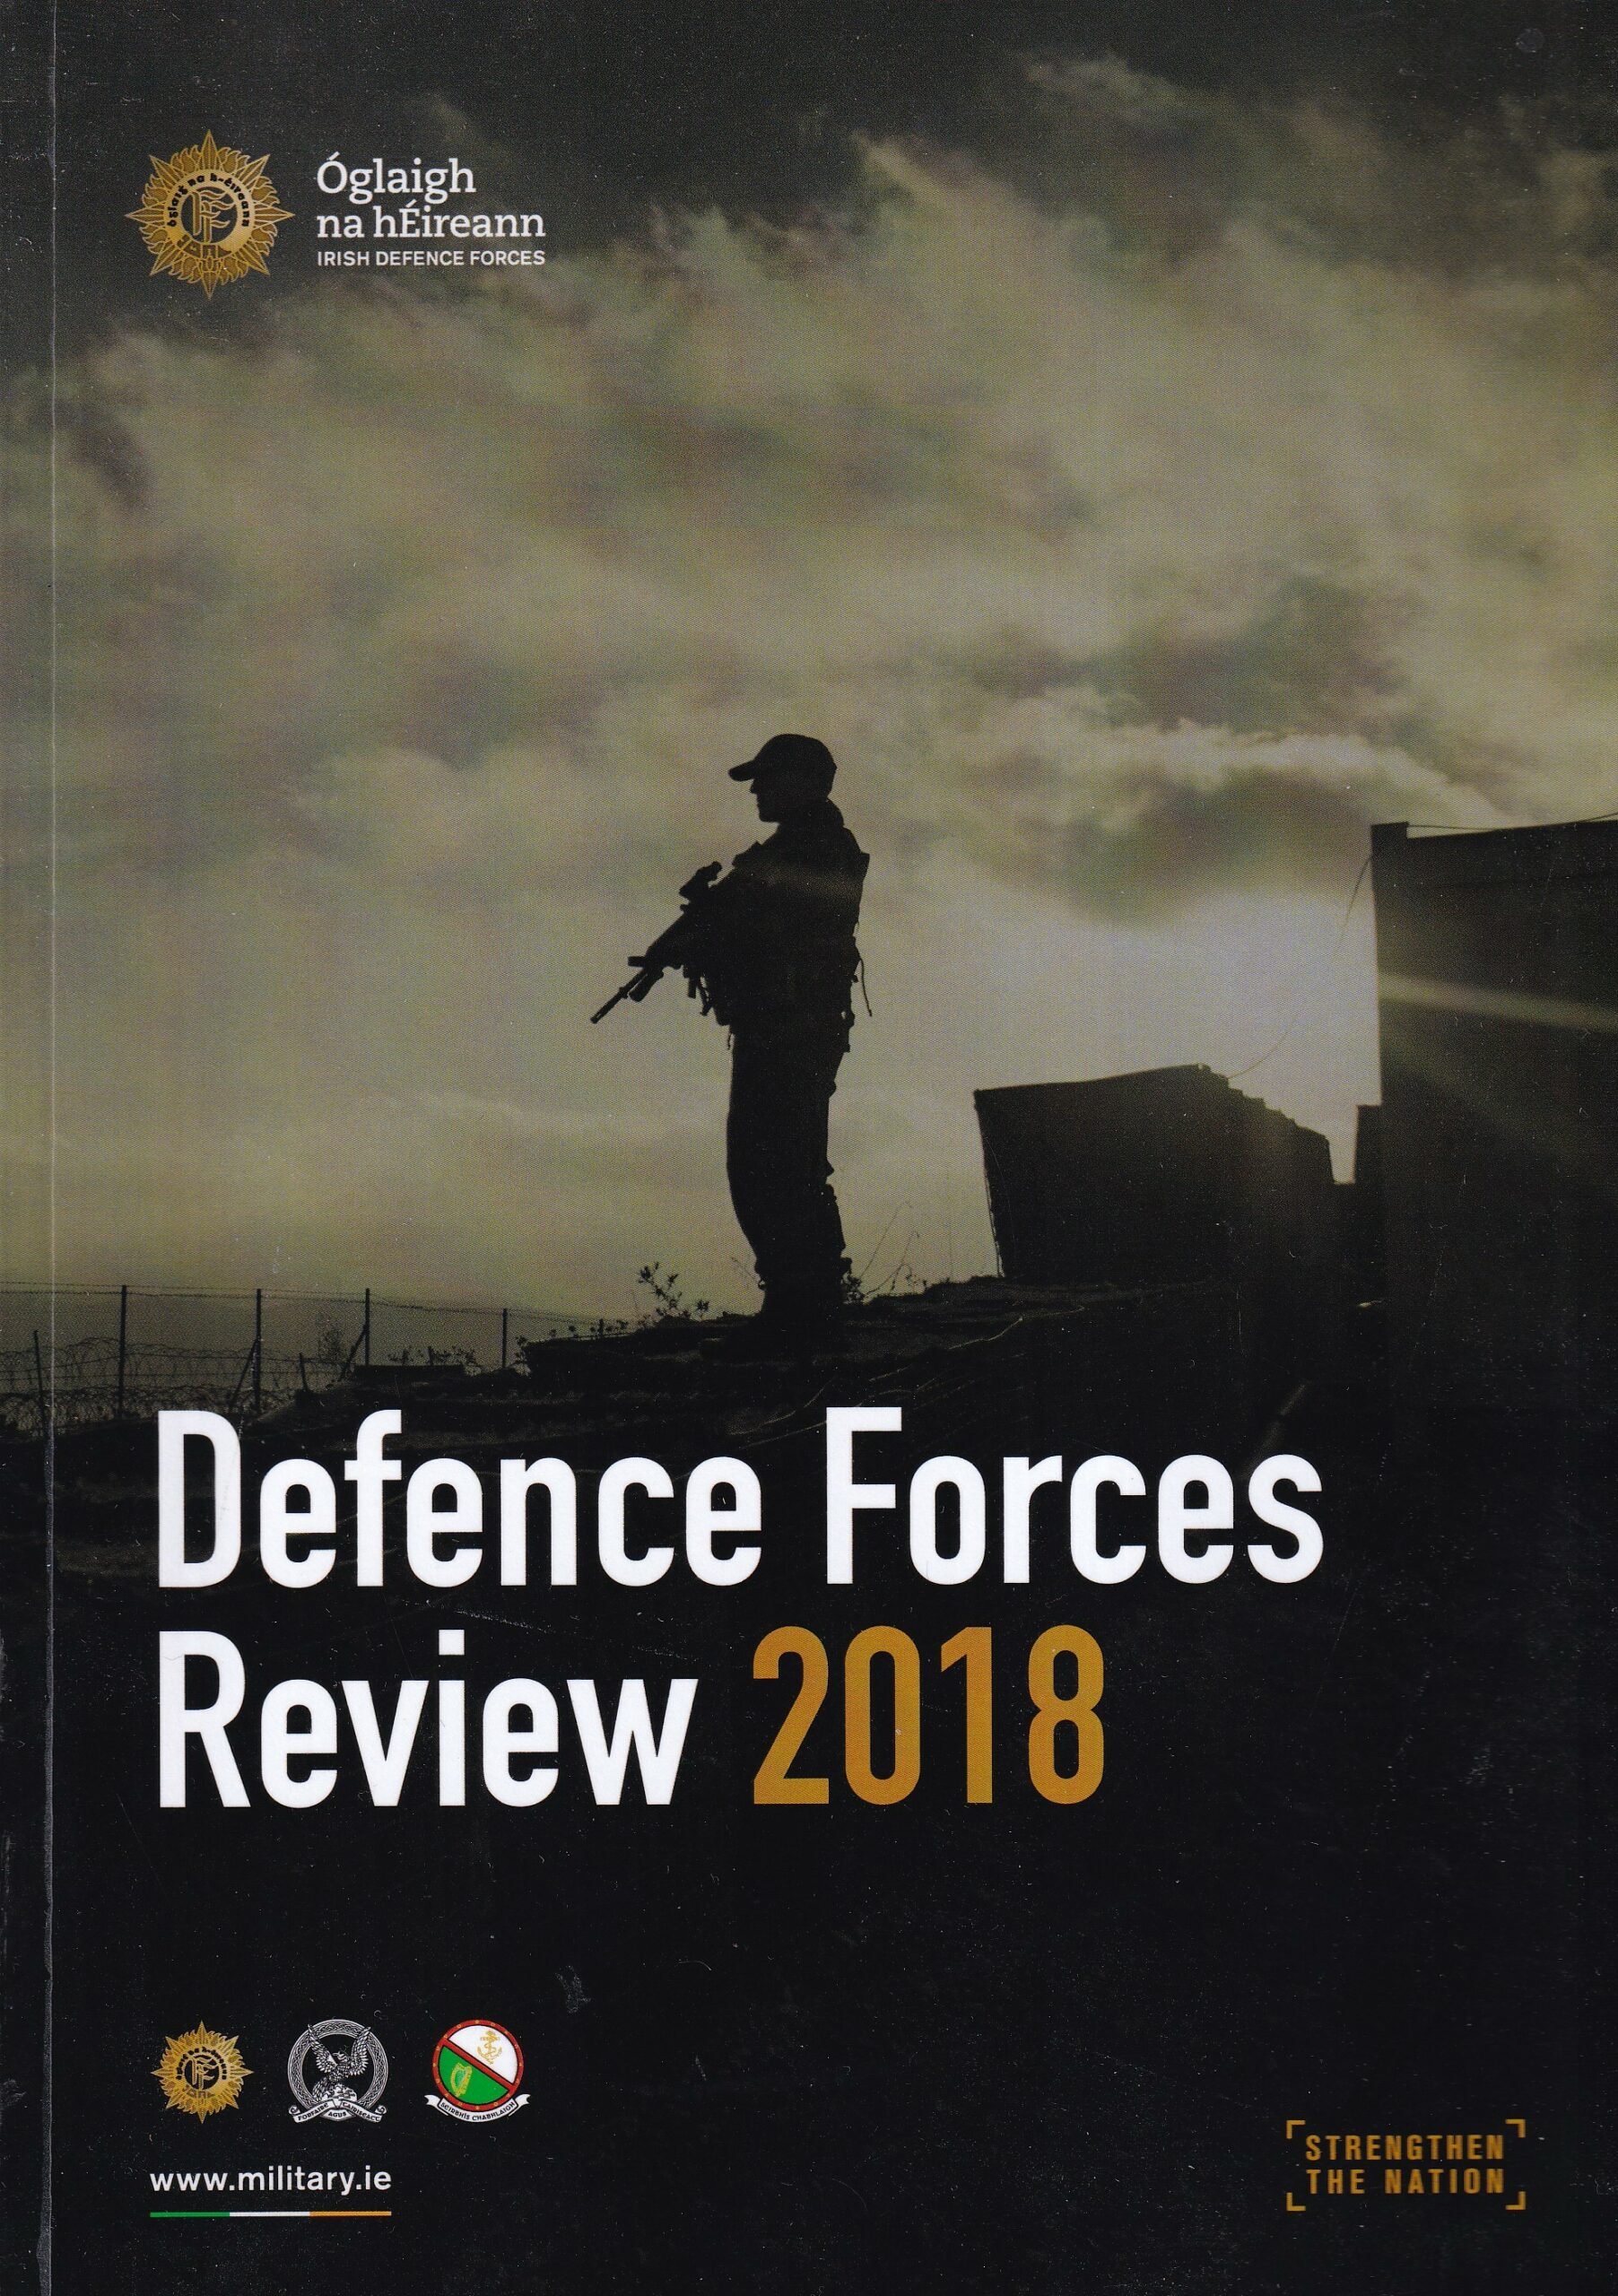 Defence Forces Review 2018 | Irish Defence Forces | Charlie Byrne's